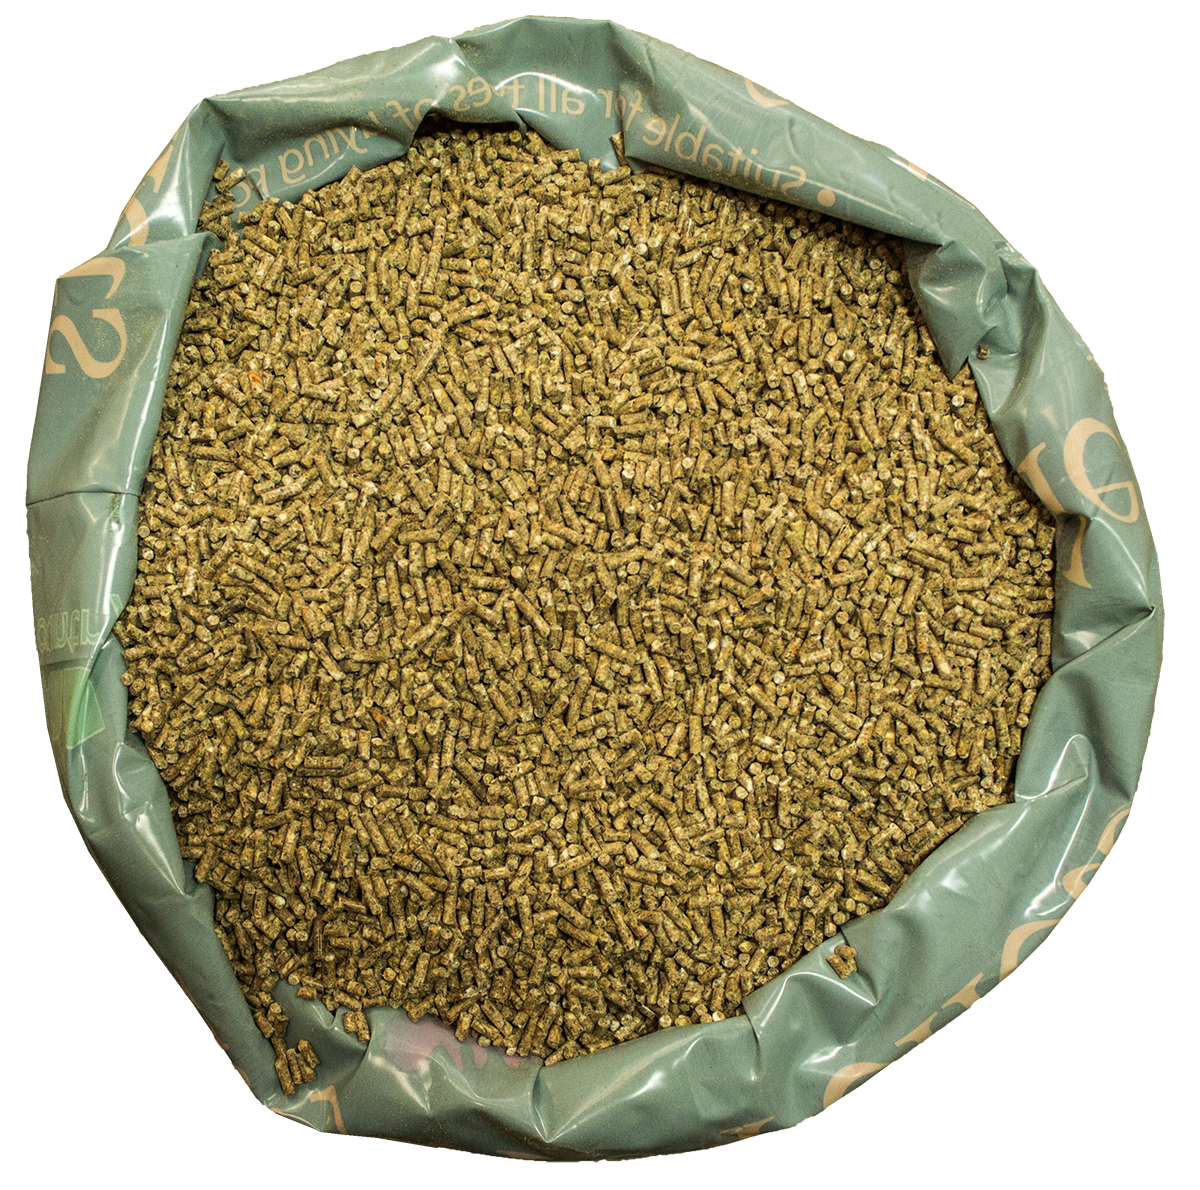 Country UF Poultry Layers Pellets 20kg